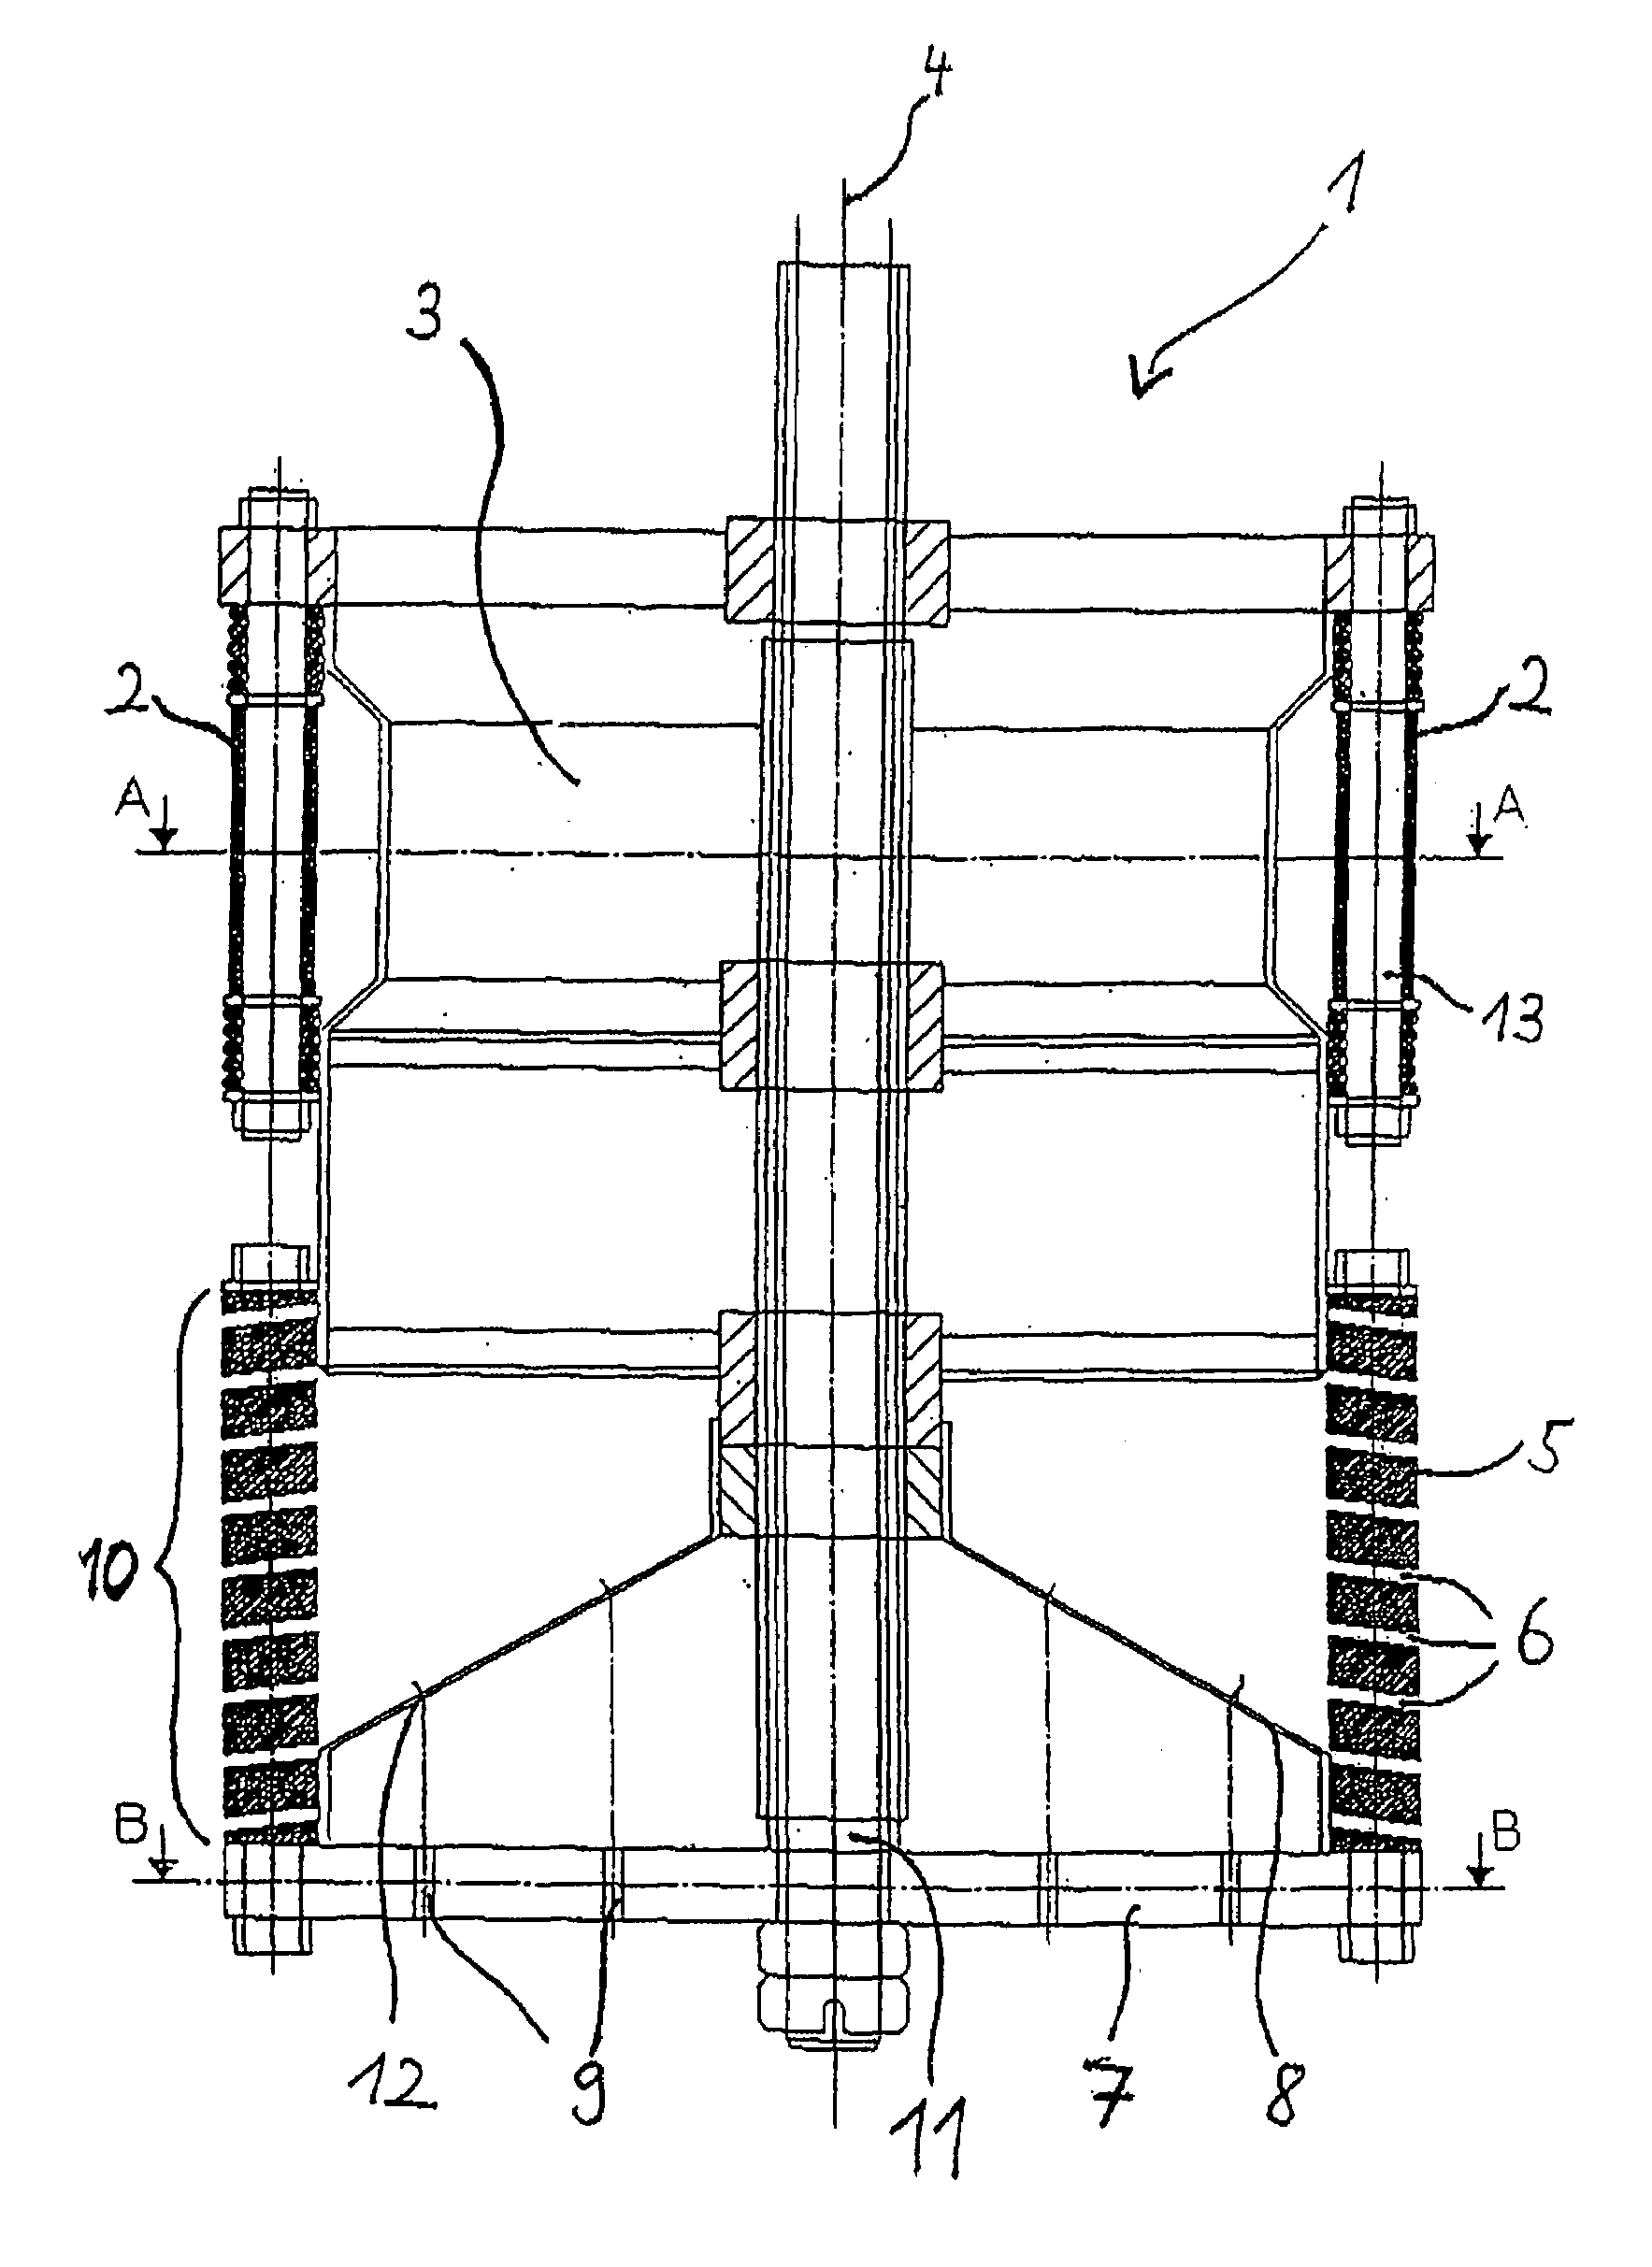 Device for spraying water